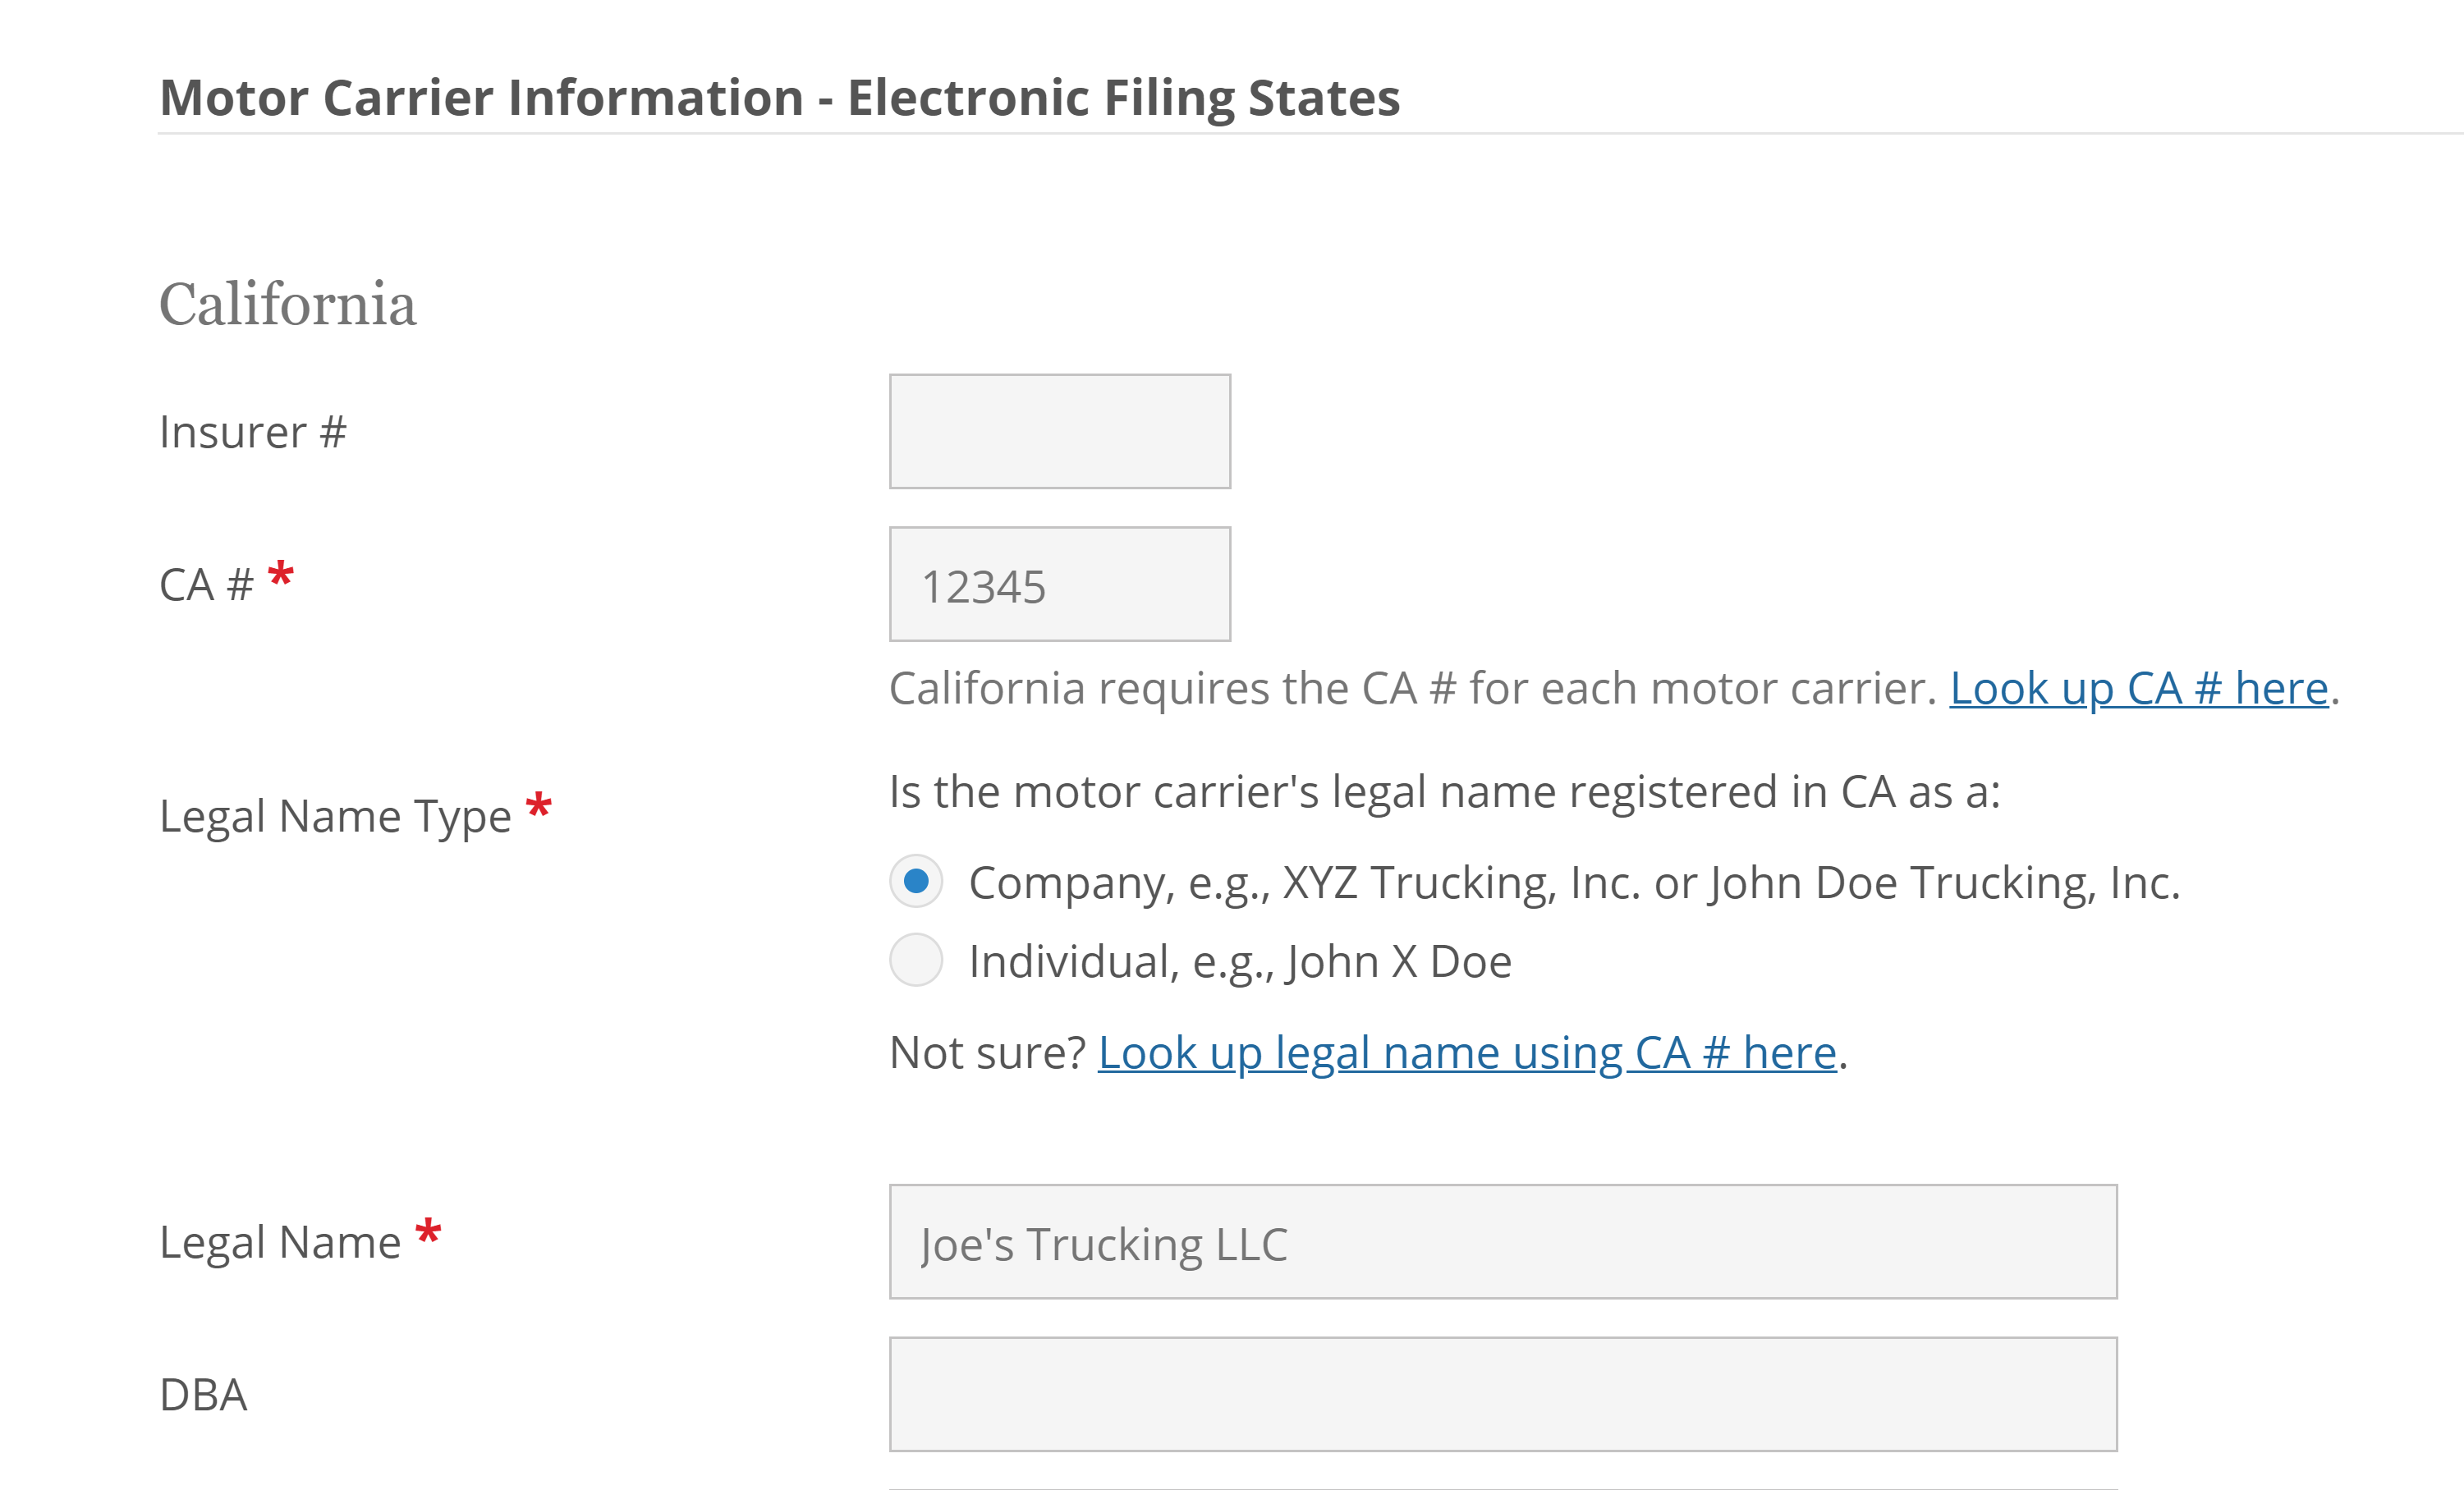 Screenshot of interface for California Motor Carrier Information and new automated review system.